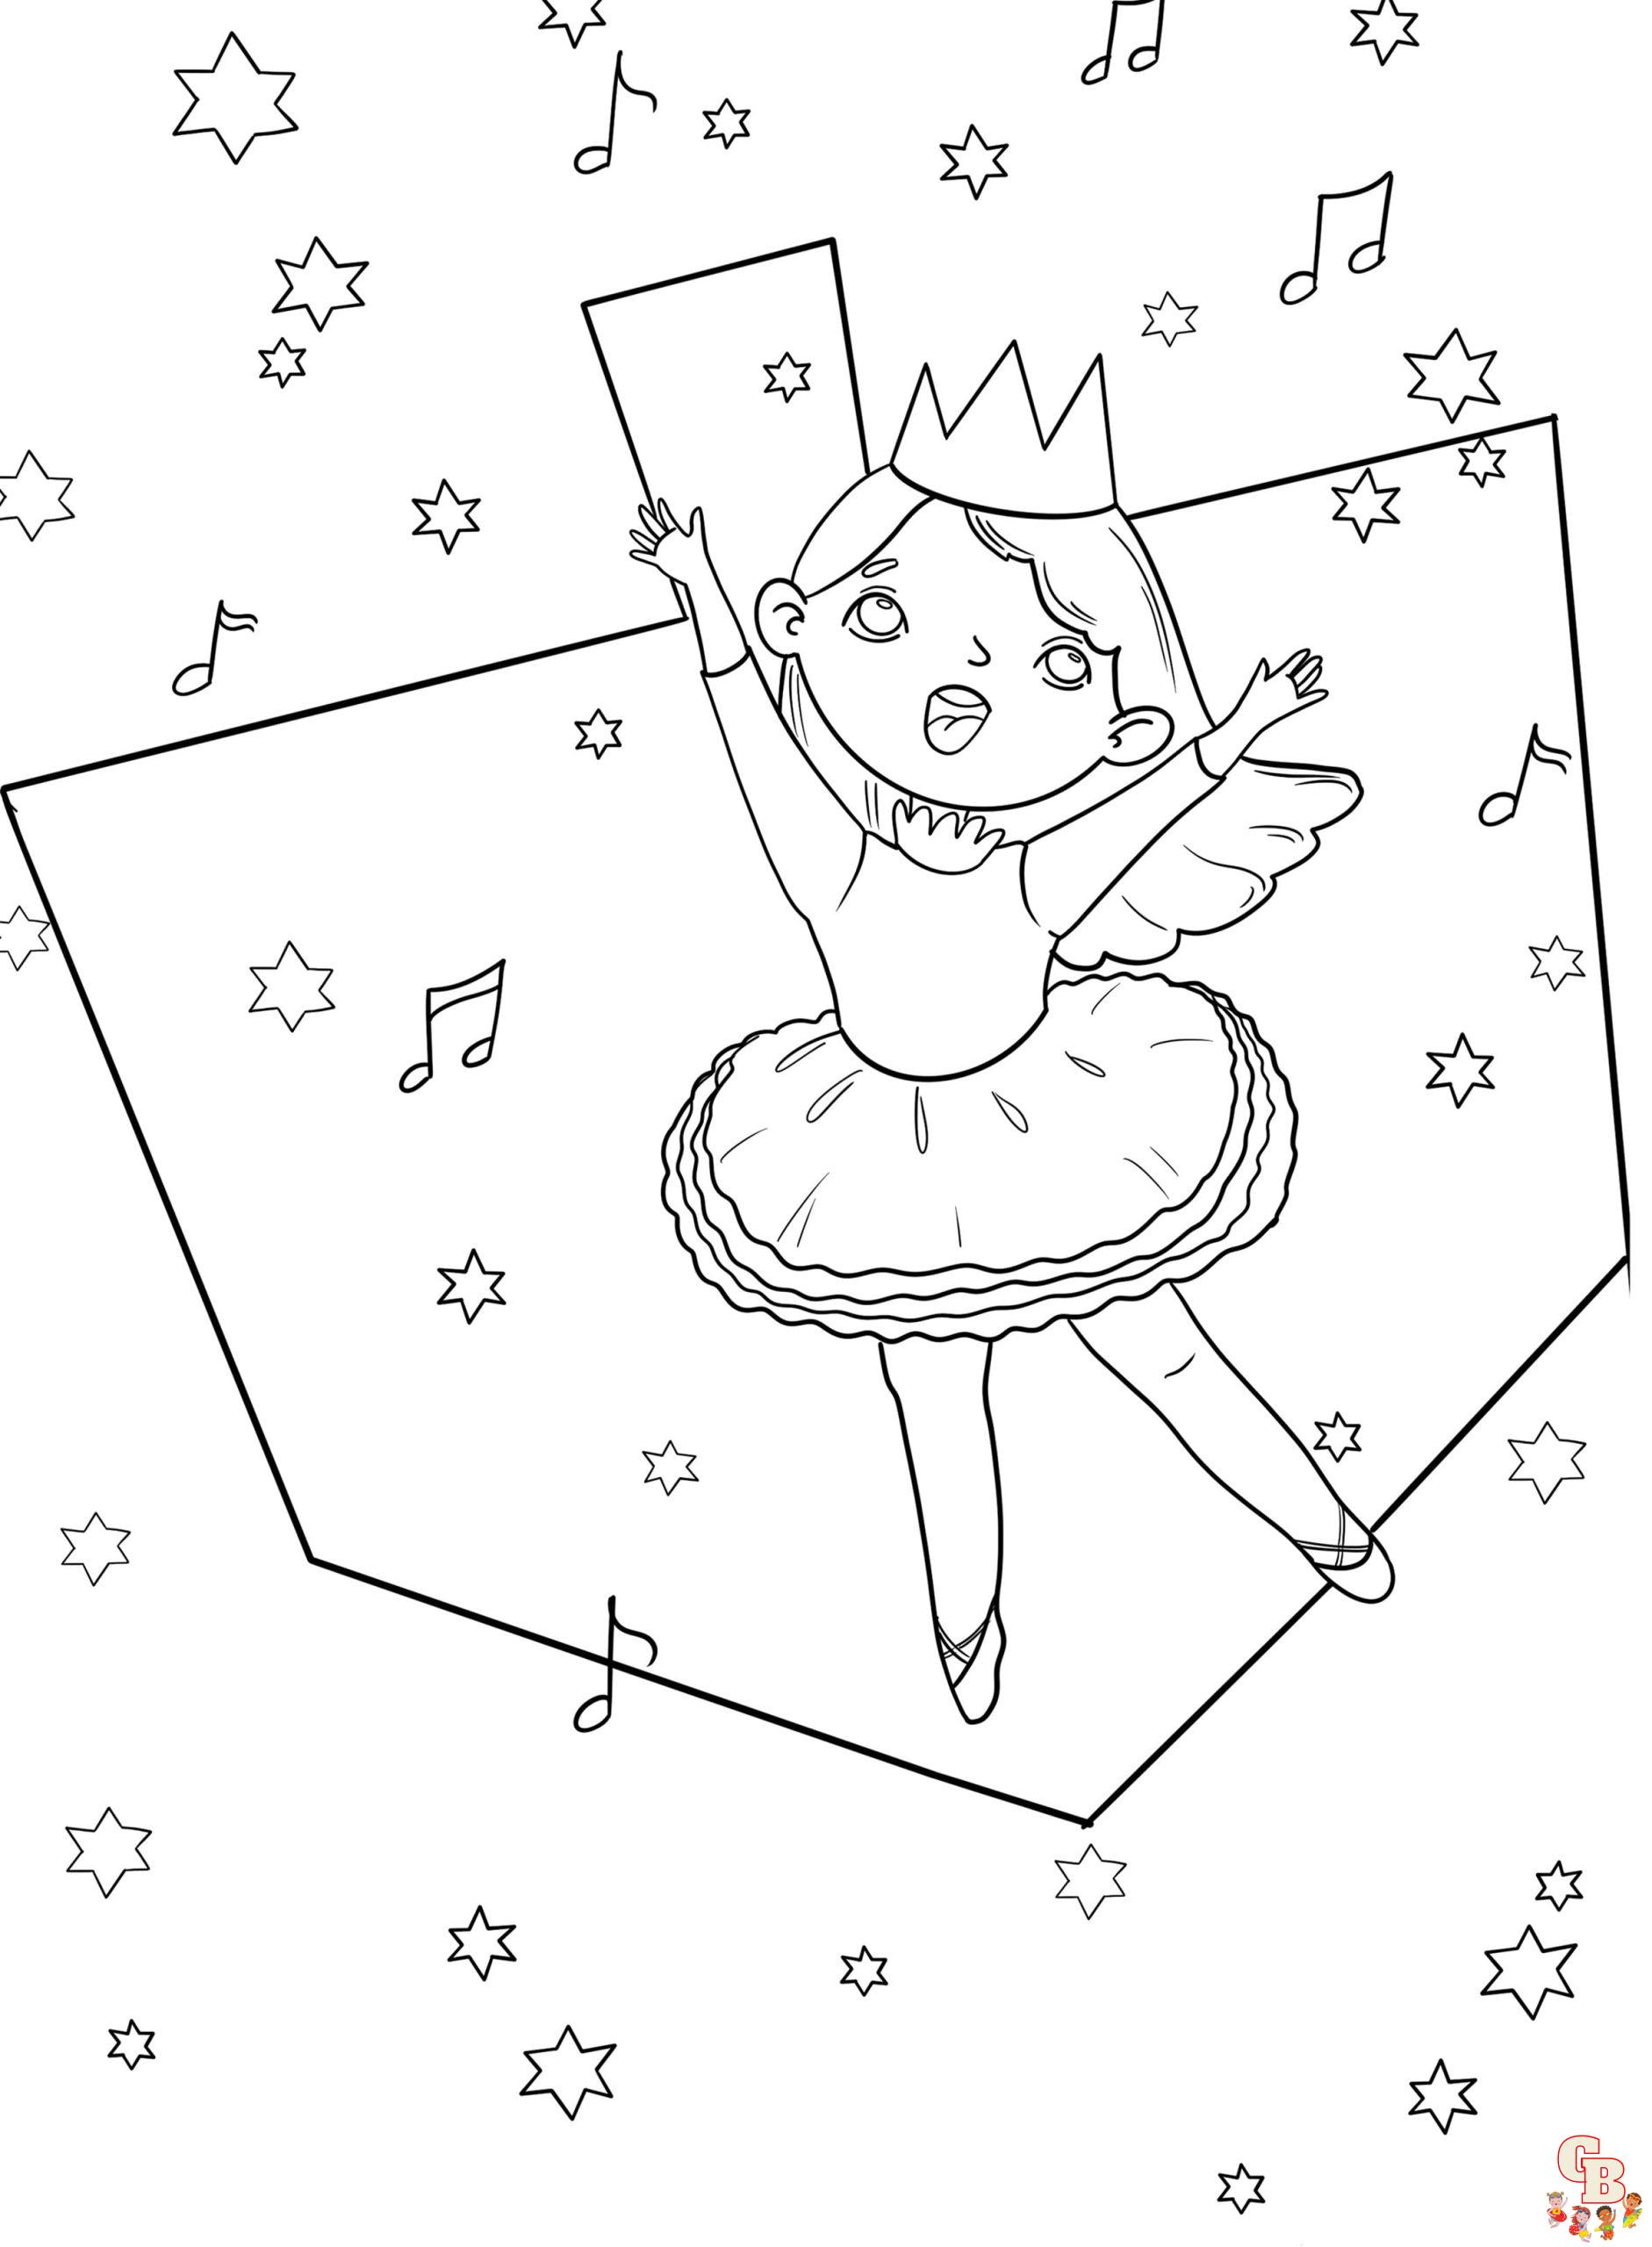 Printable pinkalicious coloring pages free for kids and adults